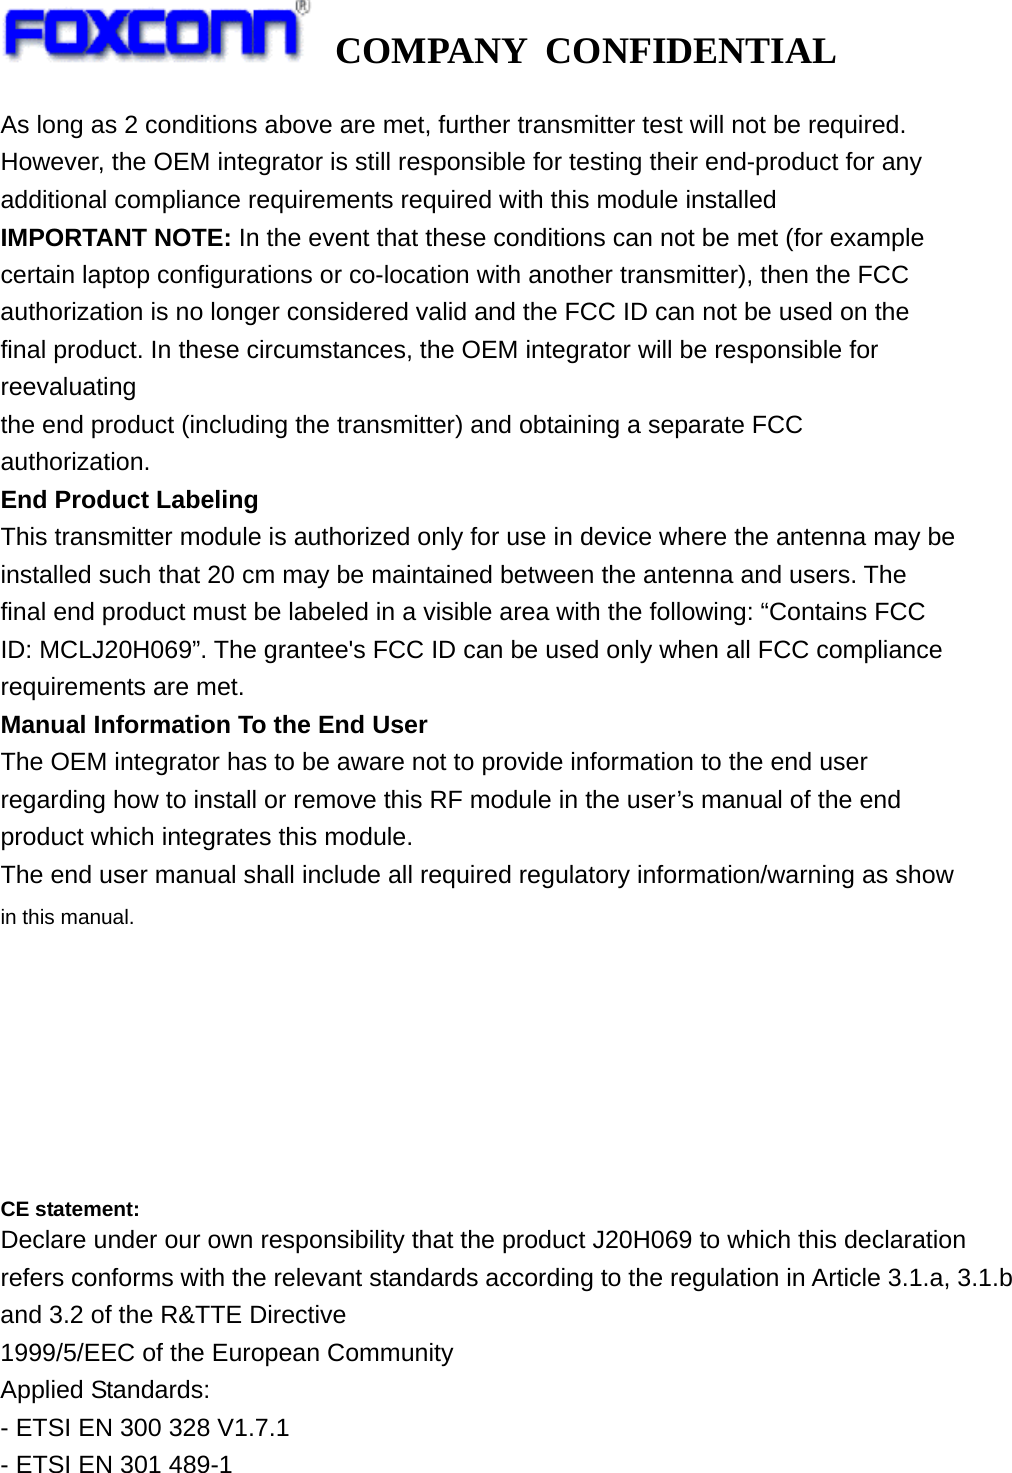   COMPANY CONFIDENTIAL             As long as 2 conditions above are met, further transmitter test will not be required. However, the OEM integrator is still responsible for testing their end-product for any additional compliance requirements required with this module installed IMPORTANT NOTE: In the event that these conditions can not be met (for example certain laptop configurations or co-location with another transmitter), then the FCC authorization is no longer considered valid and the FCC ID can not be used on the final product. In these circumstances, the OEM integrator will be responsible for reevaluating the end product (including the transmitter) and obtaining a separate FCC authorization. End Product Labeling This transmitter module is authorized only for use in device where the antenna may be installed such that 20 cm may be maintained between the antenna and users. The final end product must be labeled in a visible area with the following: “Contains FCC ID: MCLJ20H069”. The grantee&apos;s FCC ID can be used only when all FCC compliance requirements are met. Manual Information To the End User The OEM integrator has to be aware not to provide information to the end user regarding how to install or remove this RF module in the user’s manual of the end product which integrates this module. The end user manual shall include all required regulatory information/warning as show in this manual.        CE statement: Declare under our own responsibility that the product J20H069 to which this declaration refers conforms with the relevant standards according to the regulation in Article 3.1.a, 3.1.b and 3.2 of the R&amp;TTE Directive 1999/5/EEC of the European Community Applied Standards: - ETSI EN 300 328 V1.7.1 - ETSI EN 301 489-1 